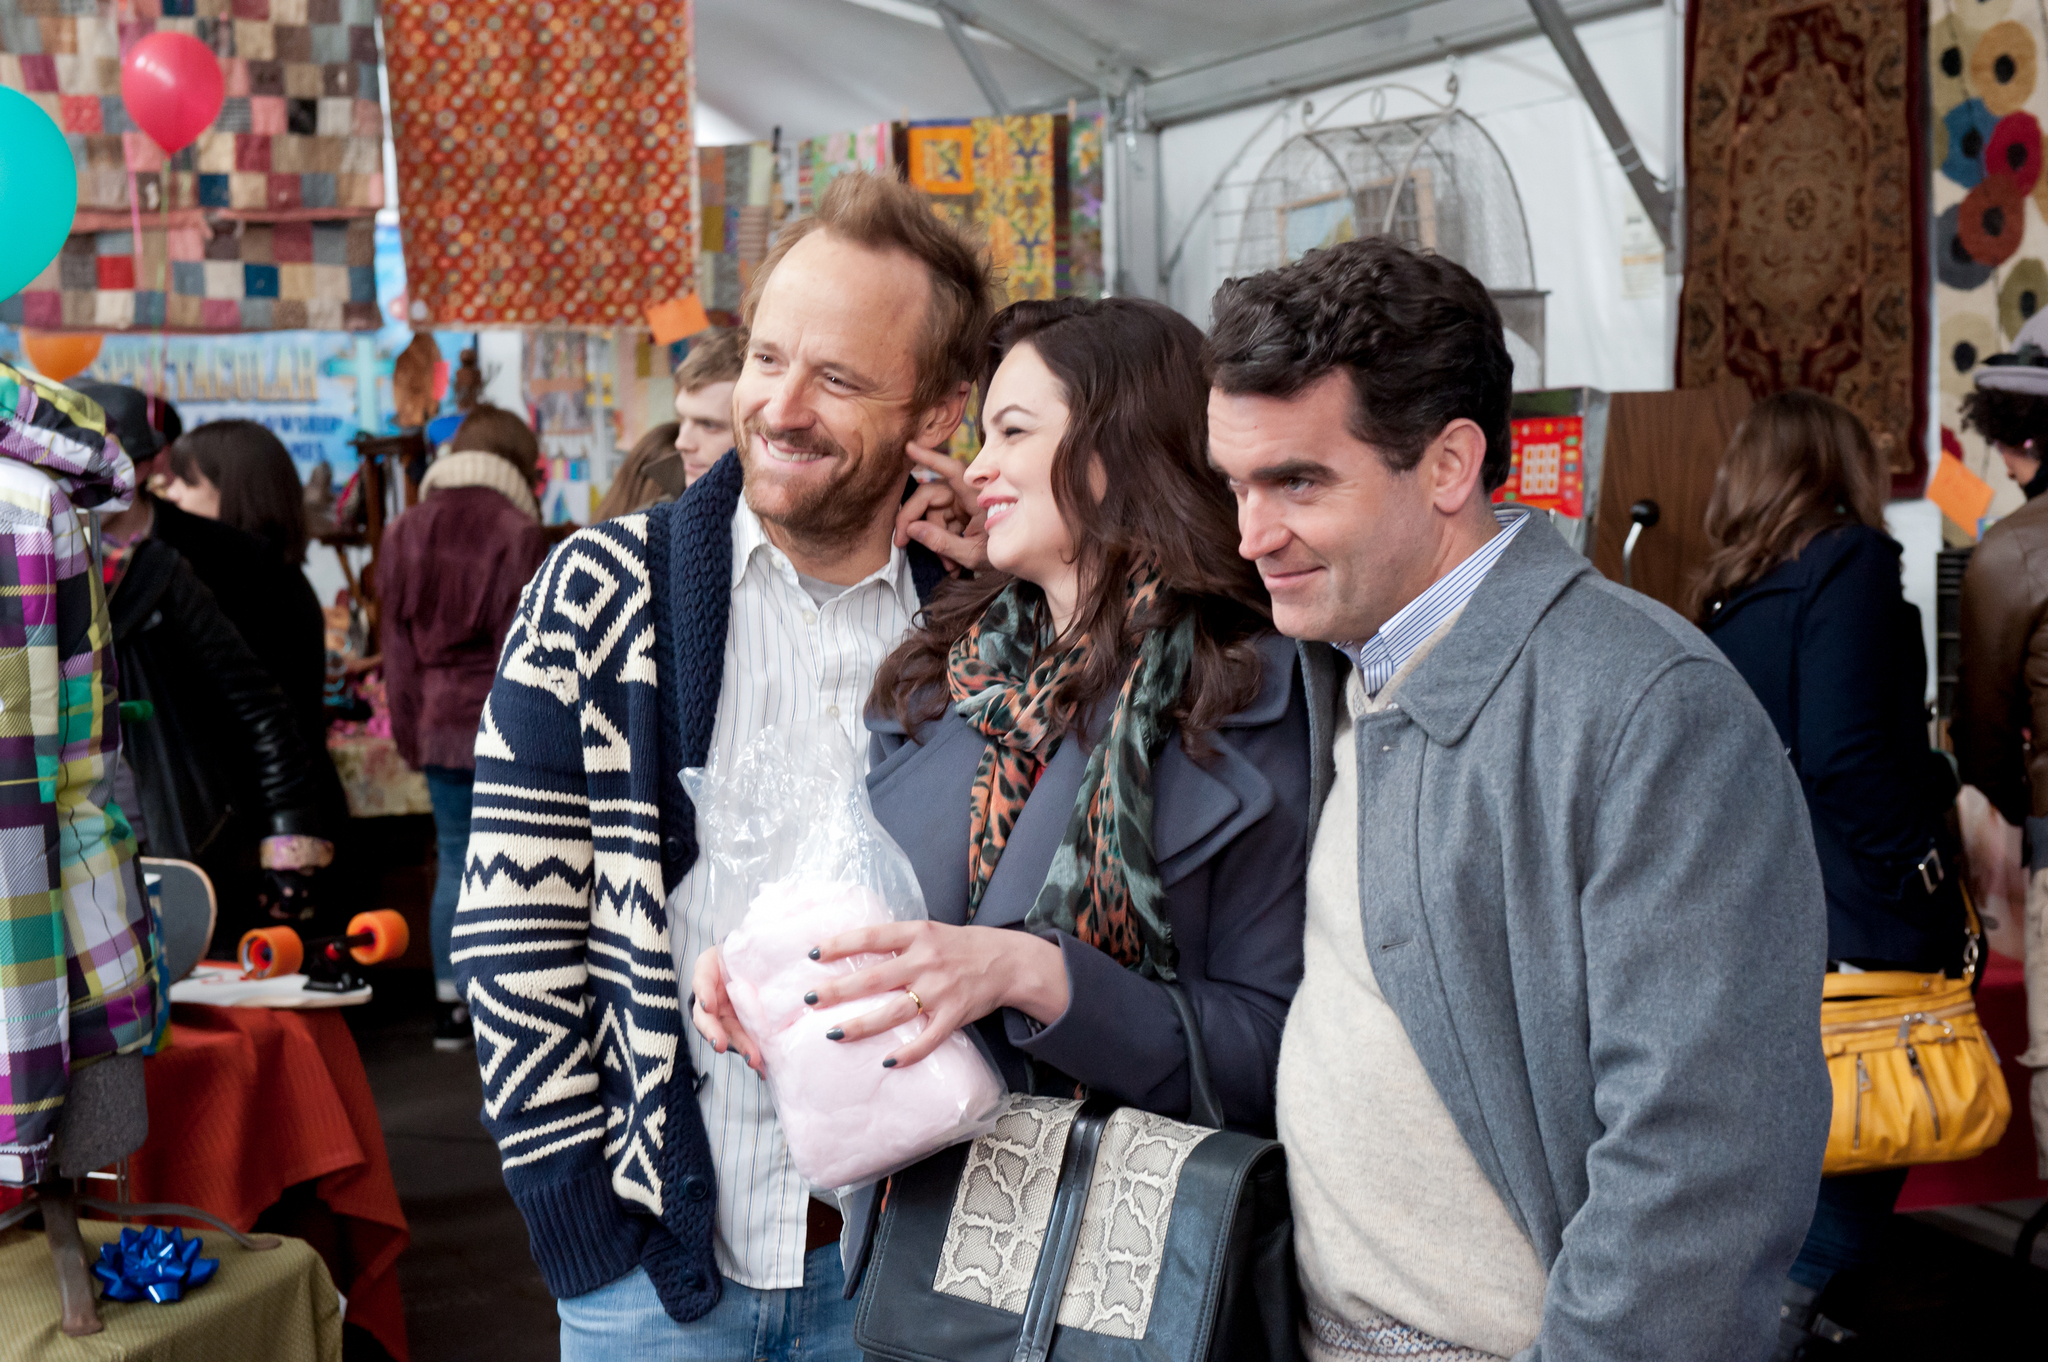 Tammy Blanchard, Brian d'Arcy James and John Benjamin Hickey in The Big C (2010)